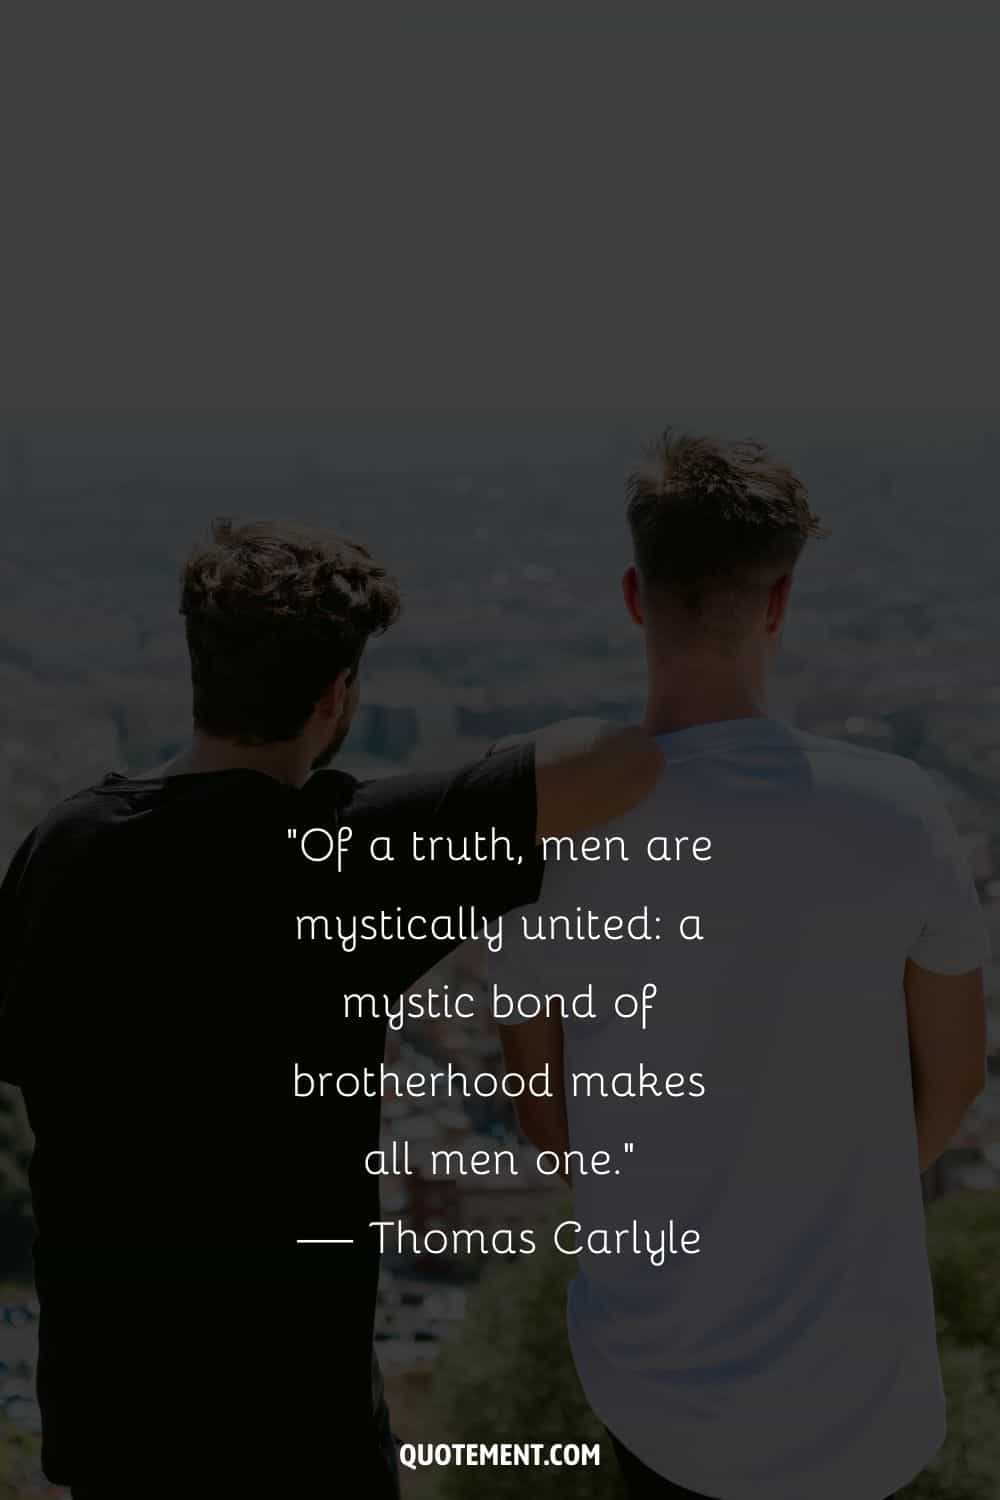 Of a truth, men are mystically united a mystic bond of brotherhood makes all men one.” — Thomas Carlyle